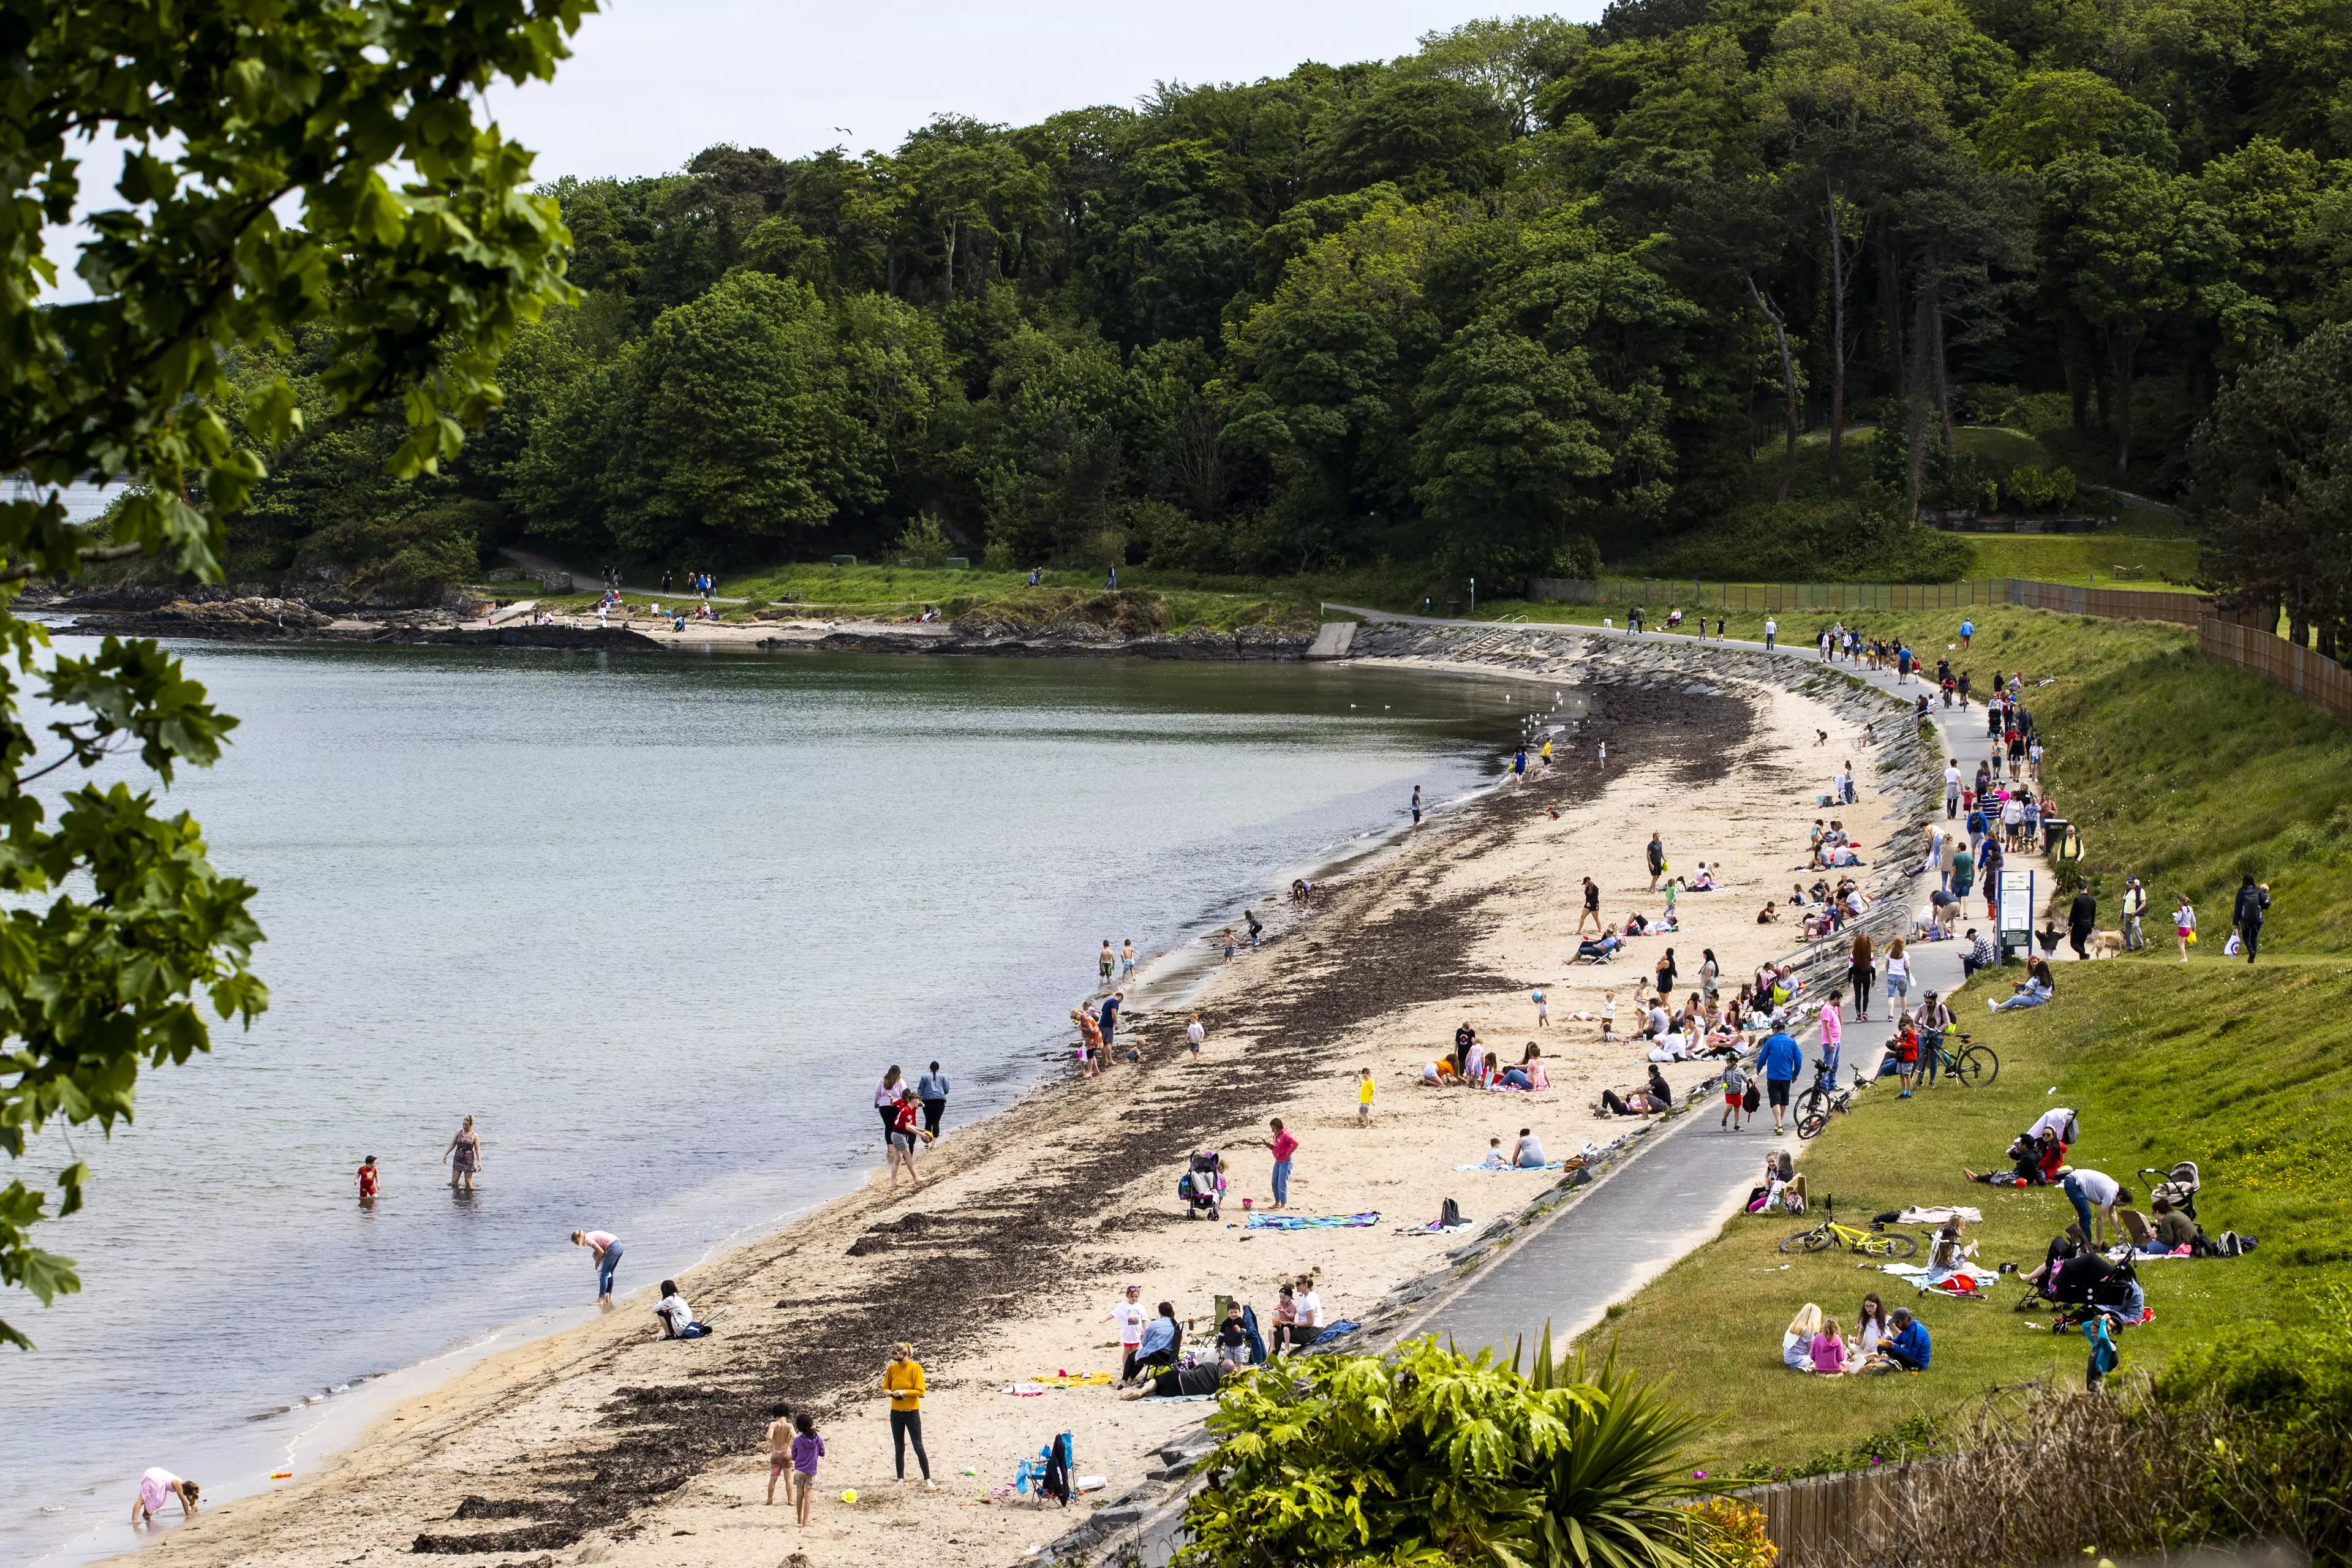 Crowds gathering during the May bank holiday at Helen's Bay in County Down.